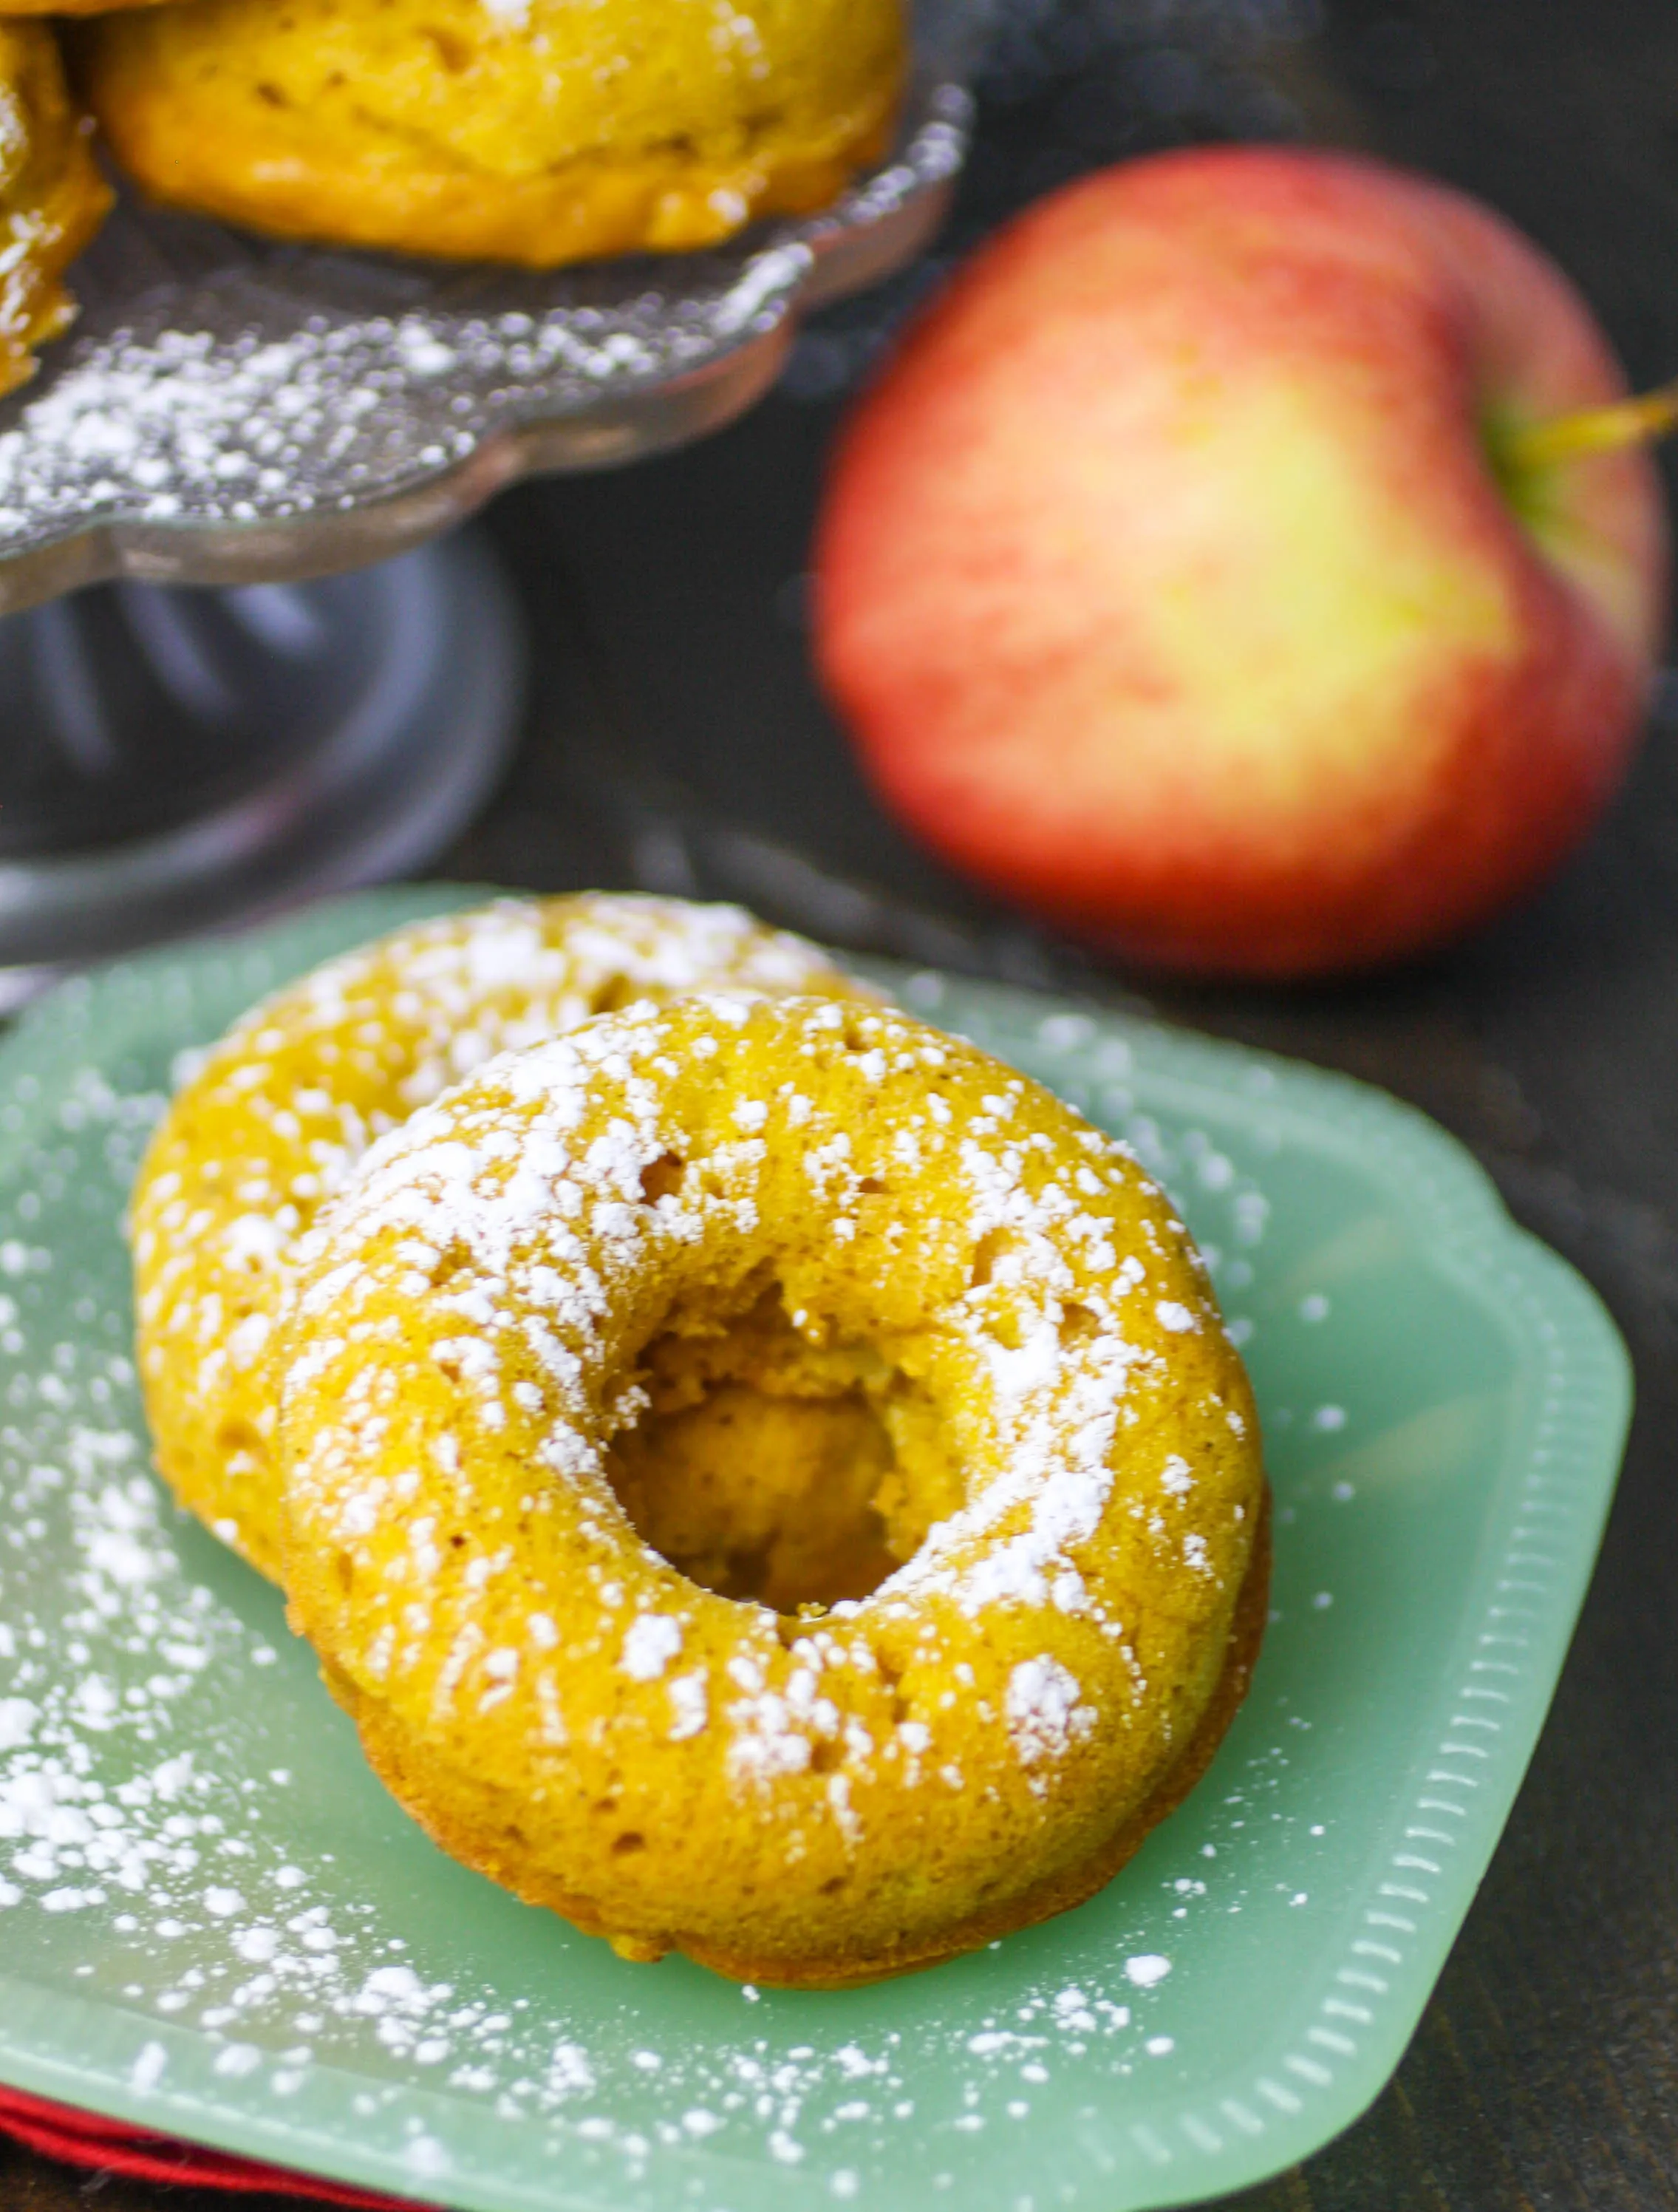 Baked Spiced Apple & Pumpkin Donuts are a seasonal delight! Make a batch of these Baked Spiced Apple & Pumpkin Donuts soon!